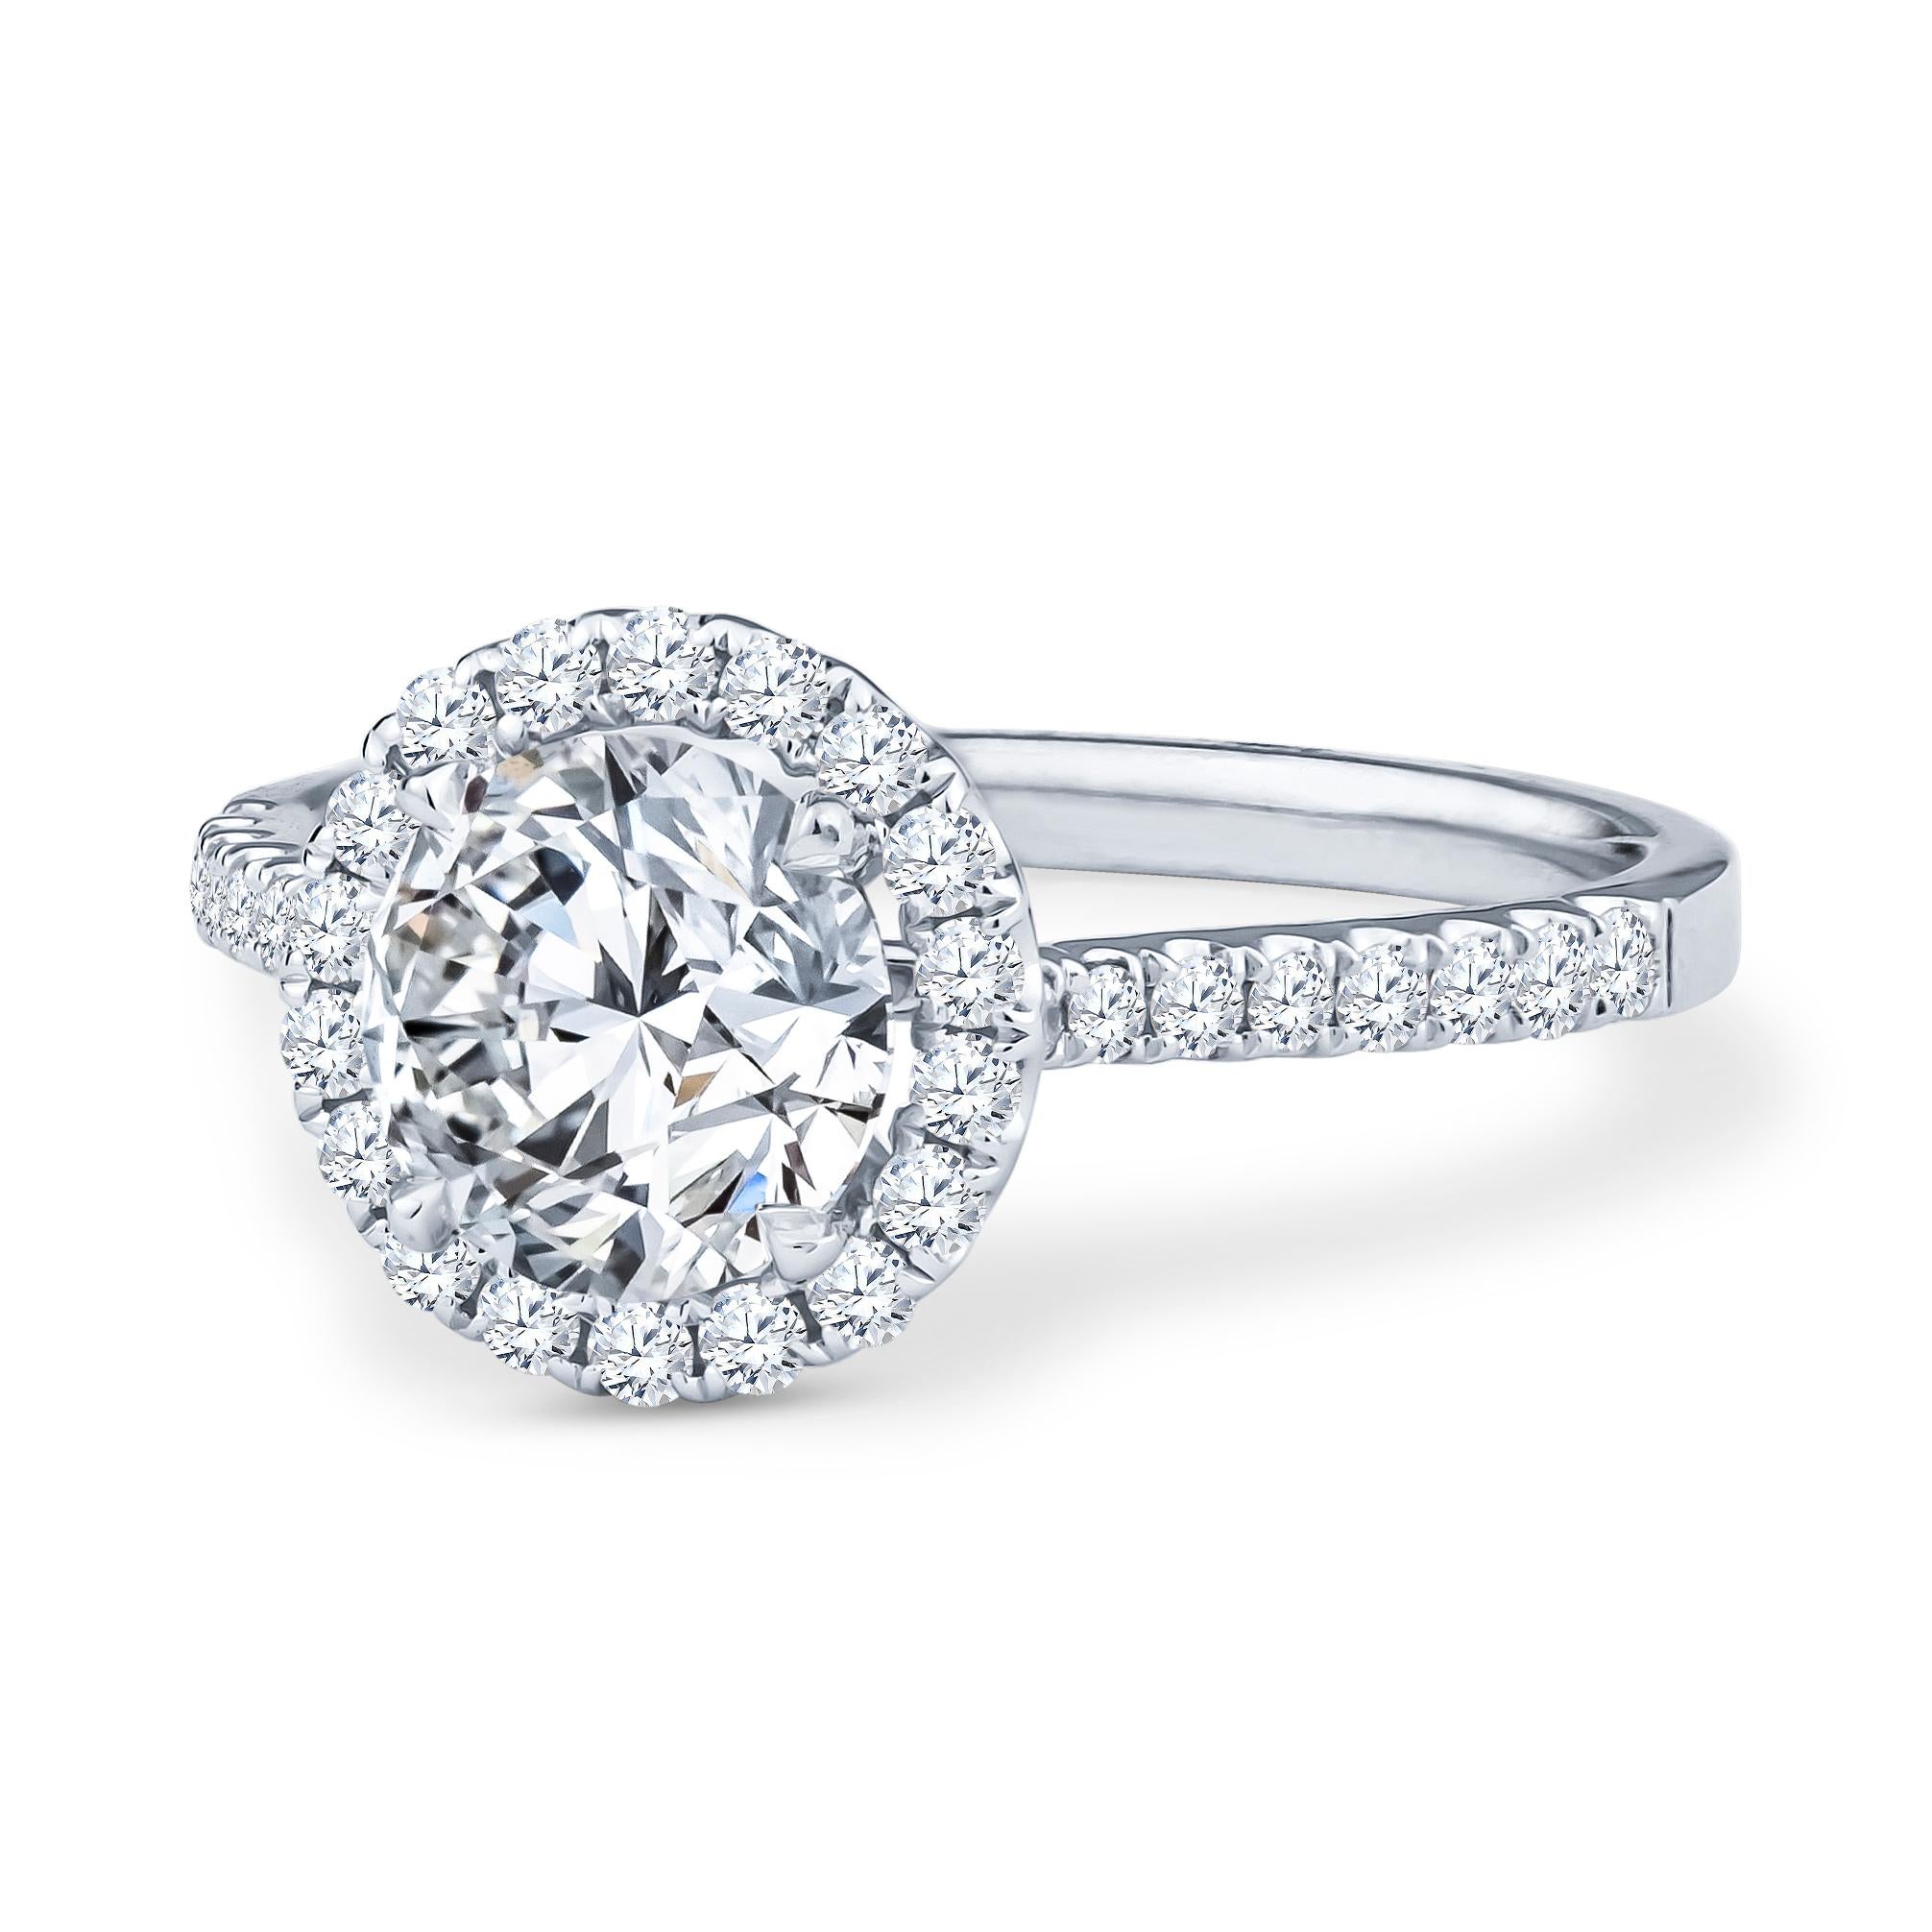 This beautiful engagement ring has a 1.43ct round brilliant cut center diamond, I SI1 (GIA 7291485021, inscribed) is set in an 18kt white gold round halo cathedral style ring. It has a semi mount with 34 round brilliant cut diamonds with a total